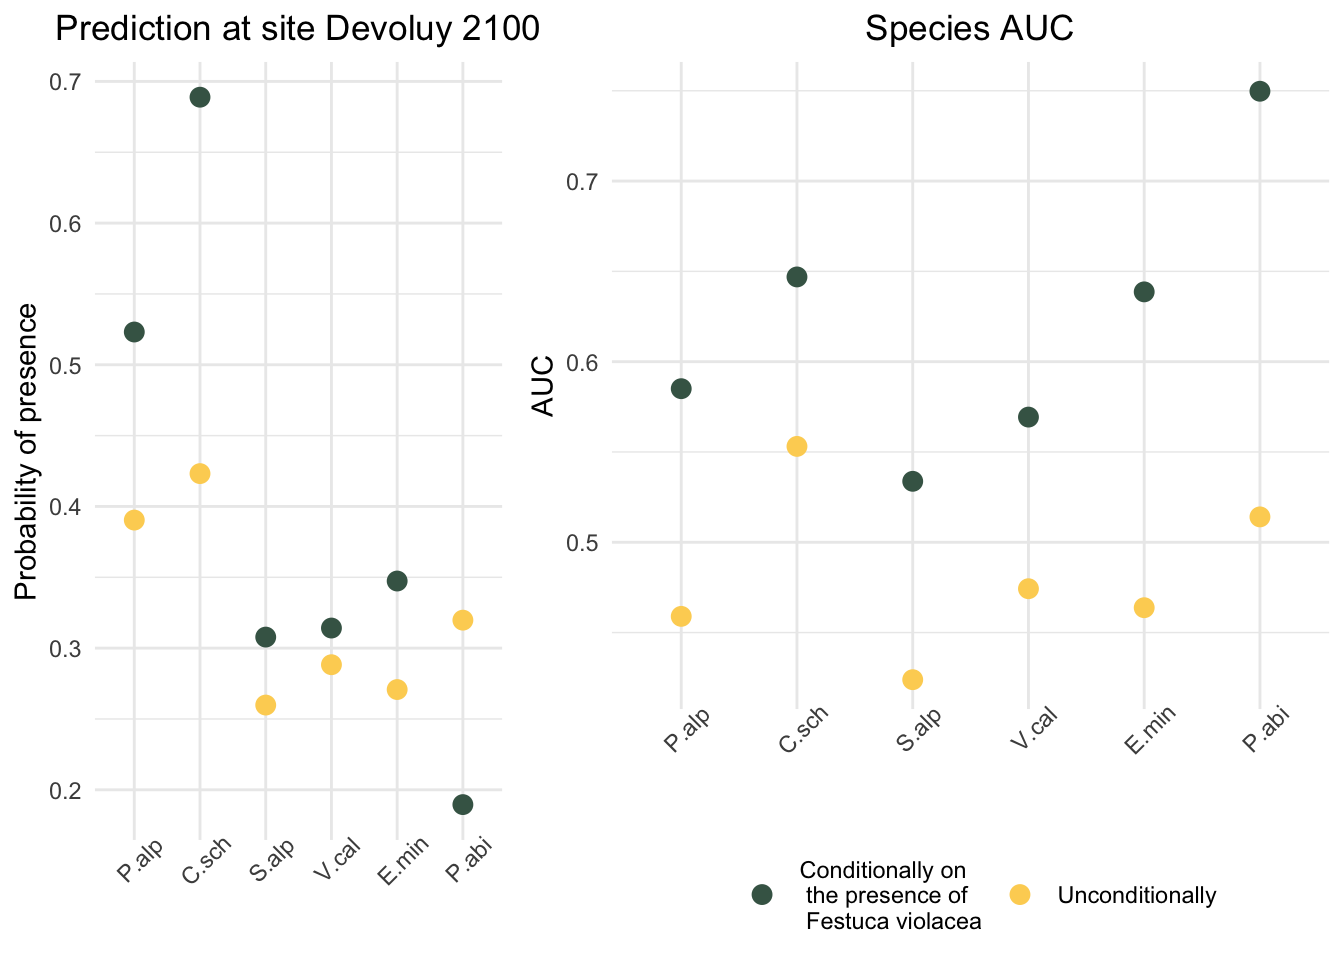 Cross-validation predicted probability of presence (a) and cross-validation AUC (b) of Poa Alpina, Campanula scheuchzeri, Soldanella alpina, Viola calcarata, Euphrasia minima and Picea Abies conditionally on Festuca violacea (green) and unconditionally (yellow). At site Devoluy 2100 all the herbaceous species of above were present (green box) while Picea abies was absent (red box)